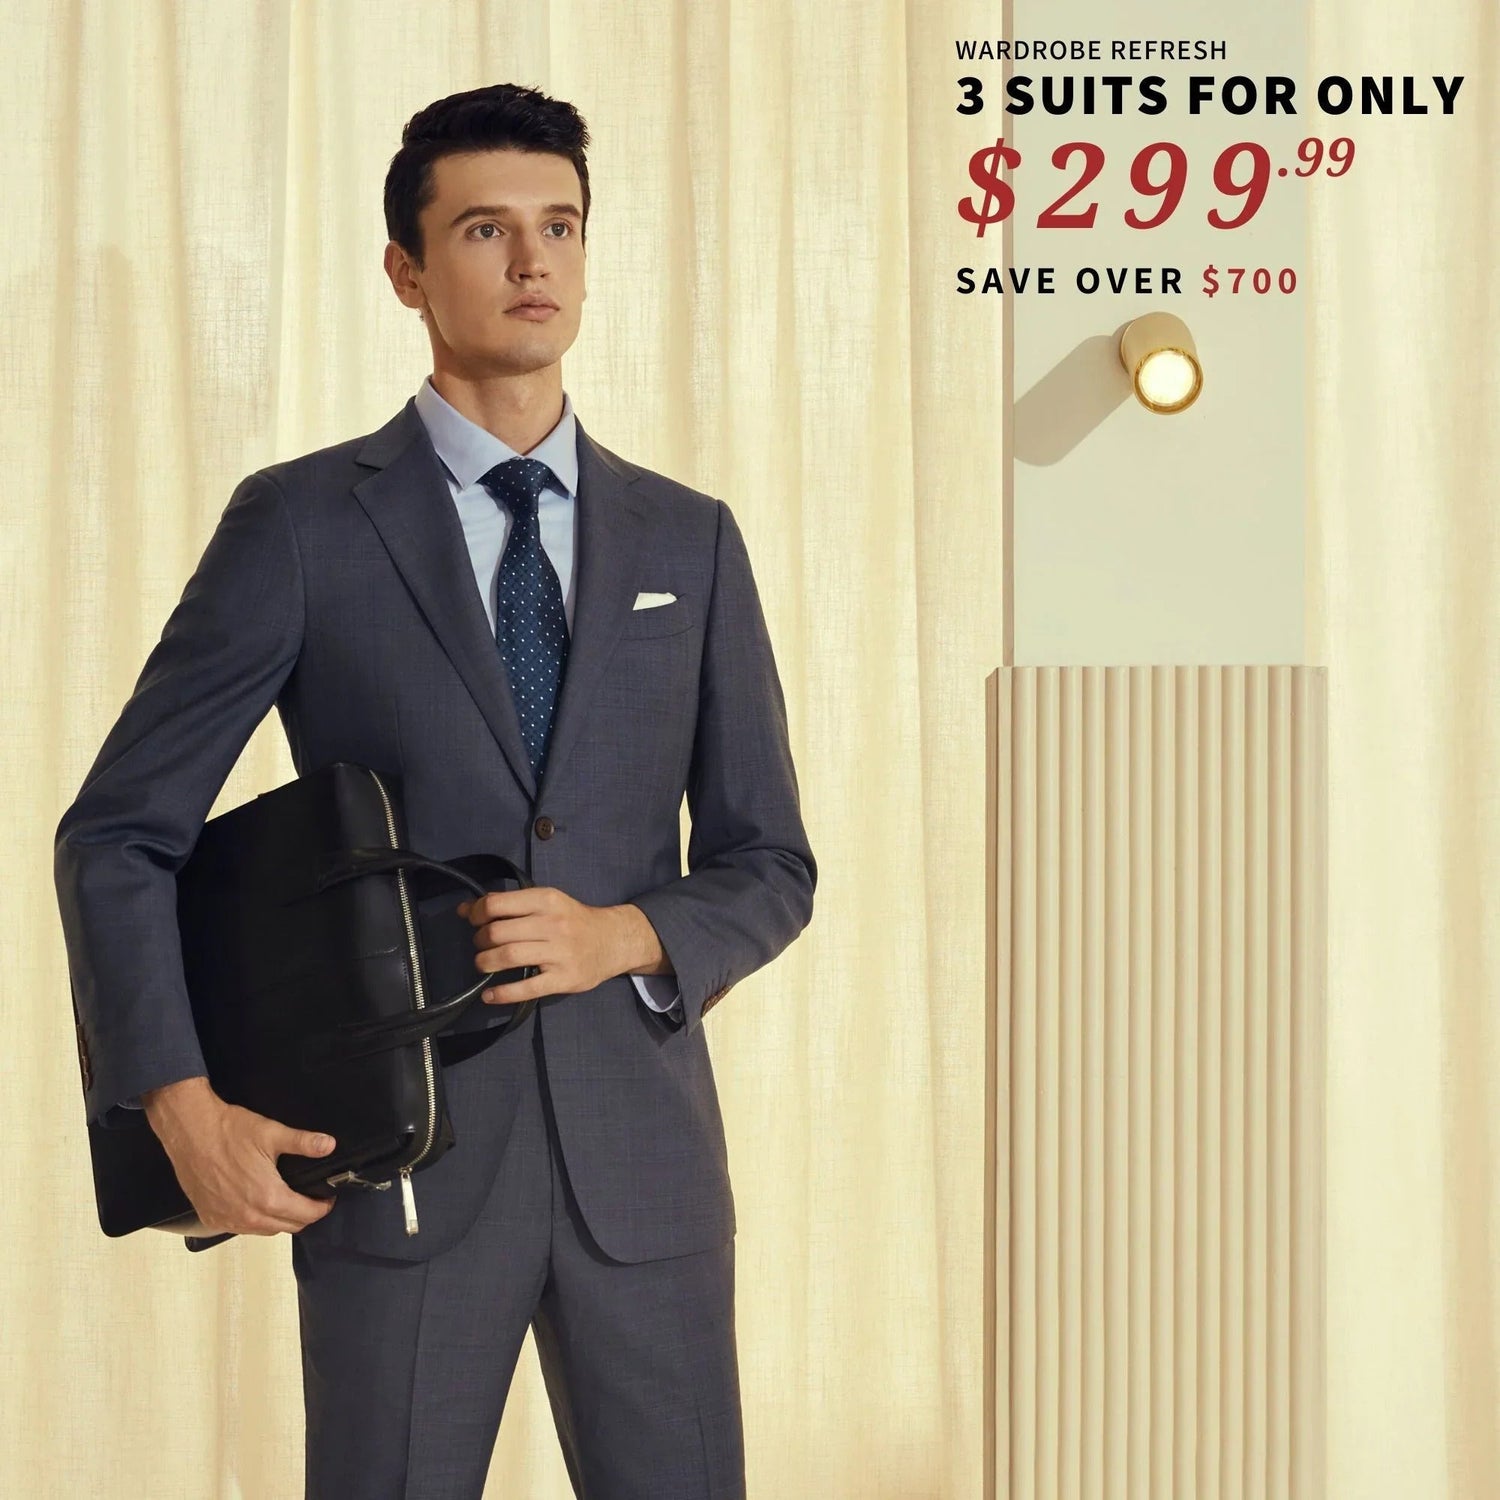 A man in a BYOB suit is holding a briefcase, his BYOB jacket size perfectly tailored.